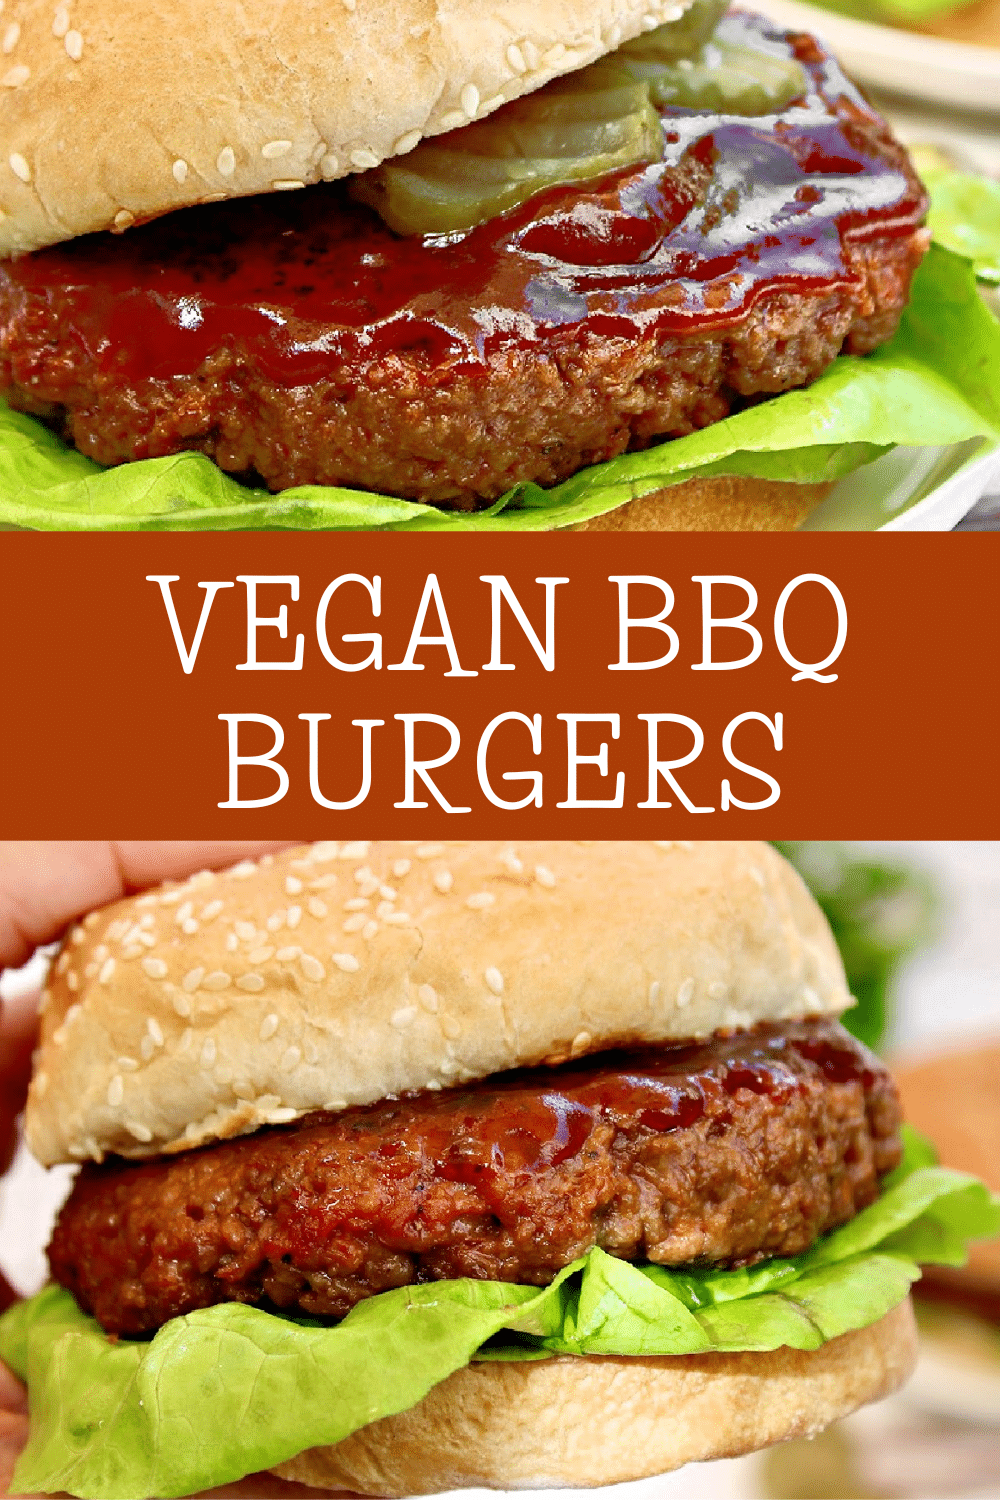 Vegan BBQ Burgers ~ Barbecue sauce mixed right into the patties takes these hearty plant-based burgers to the next level of juiciness and flavor! via @thiswifecooks